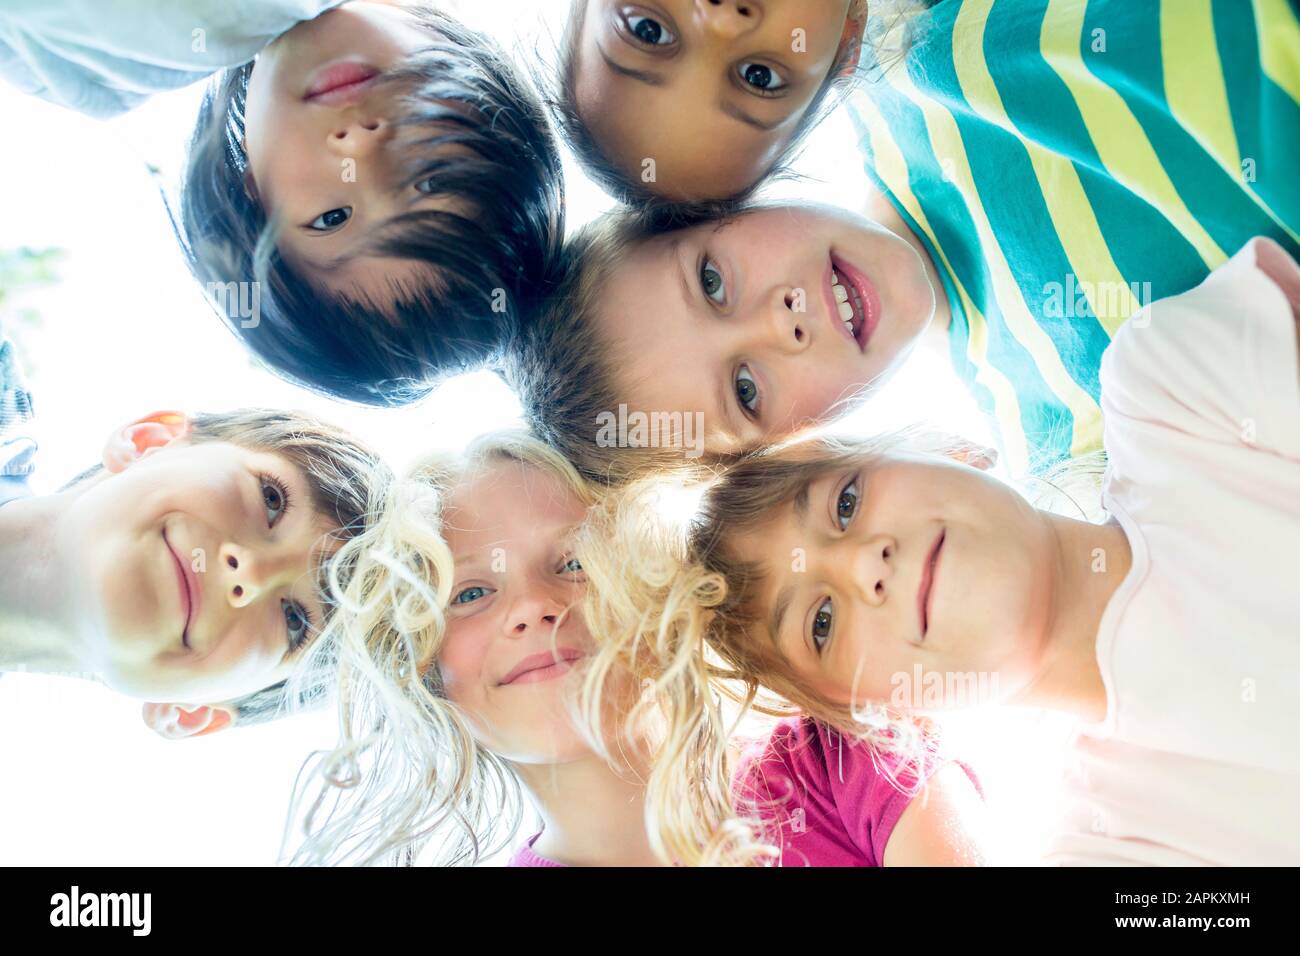 Group of children, sticking heads together, upward view Stock Photo